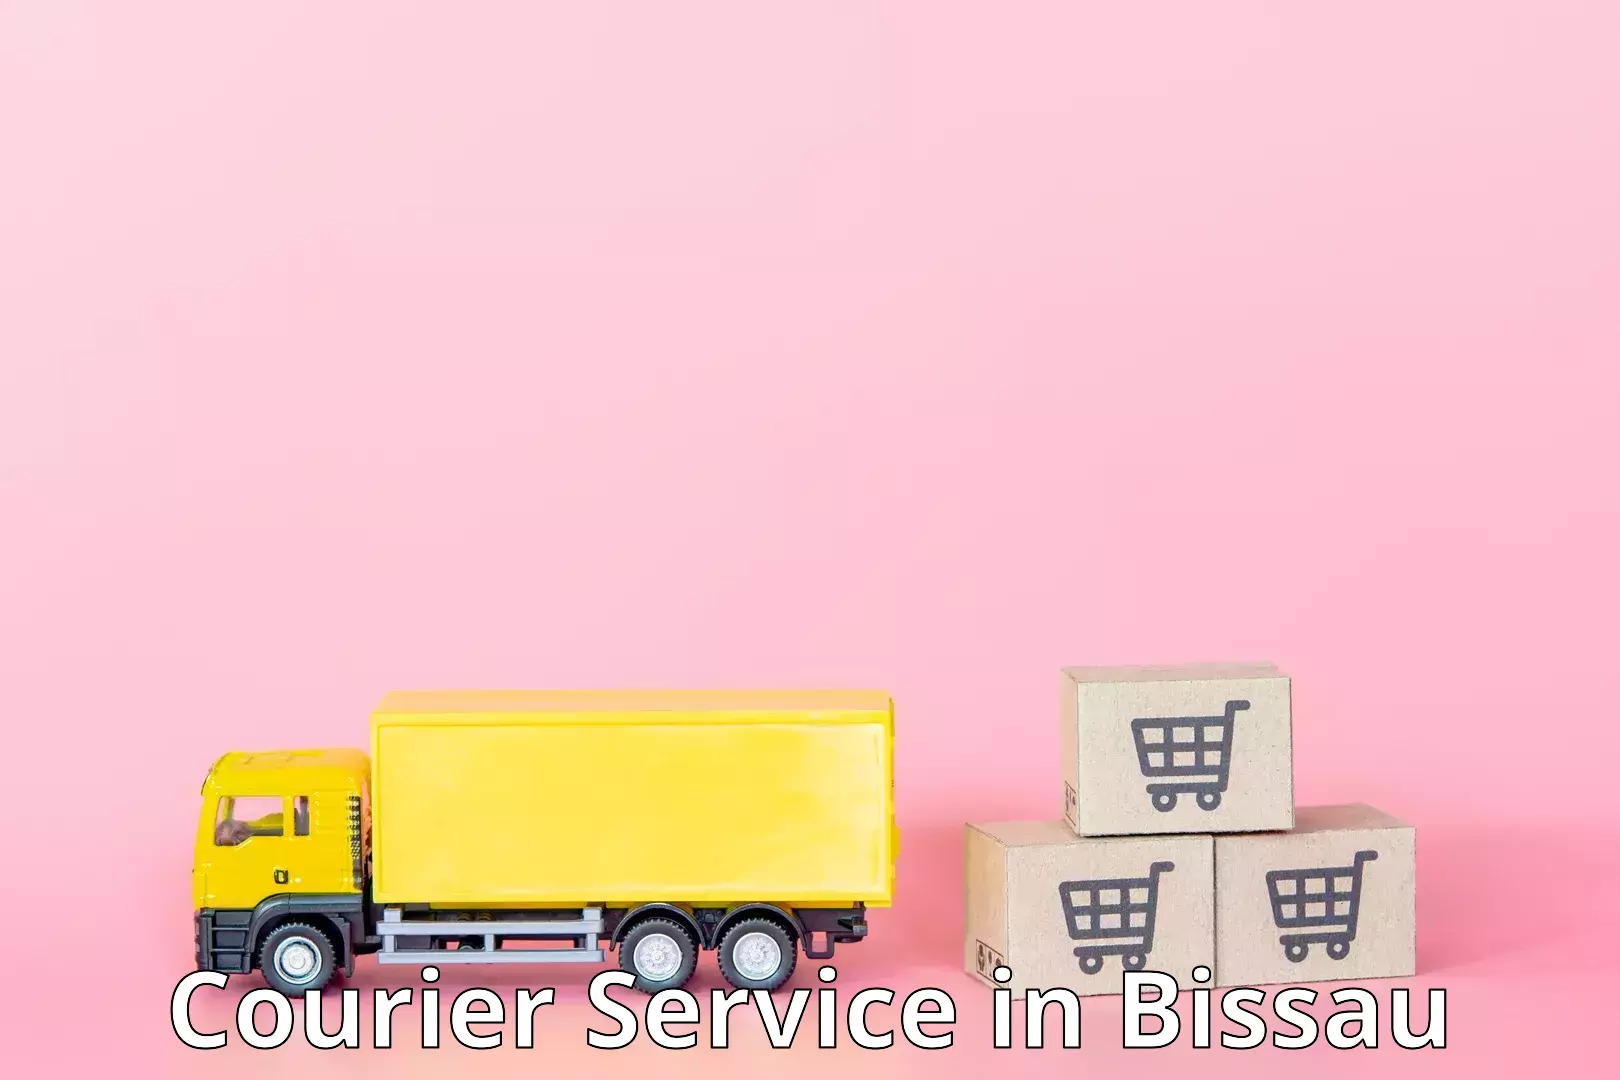 Fast delivery service in Bissau